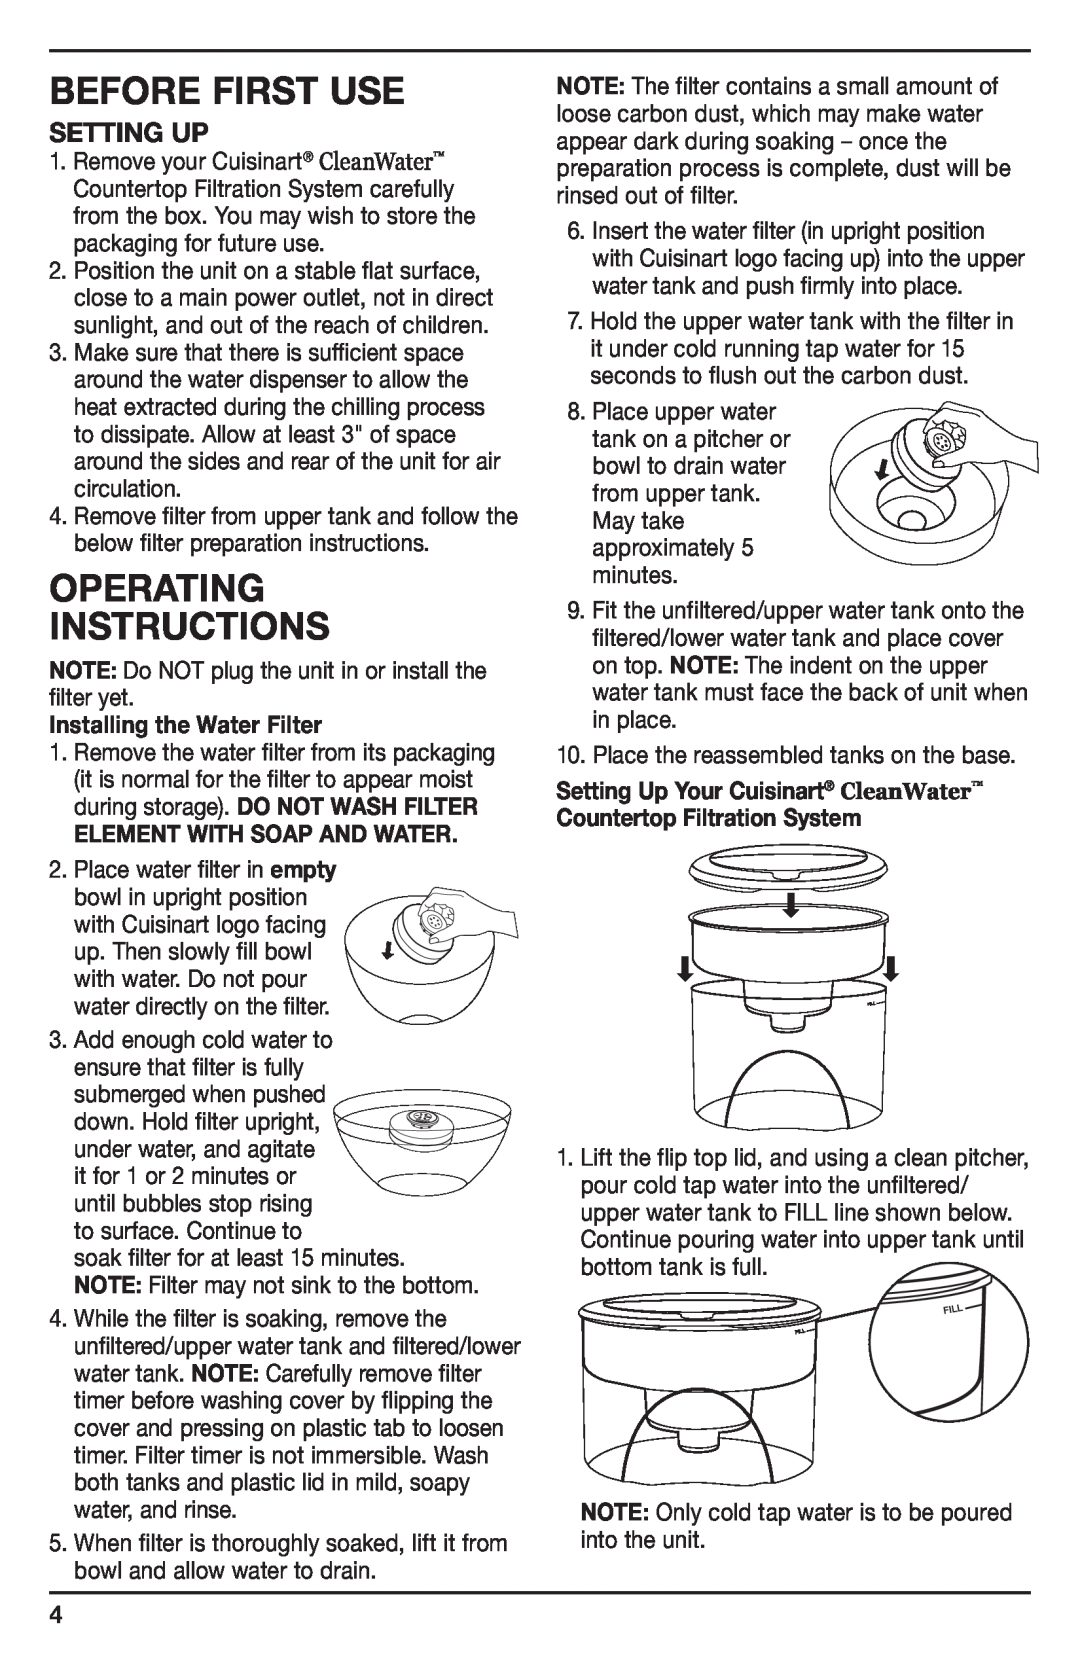 Cuisinart WCH-950 manual Before First Use, Operating Instructions, Setting Up 